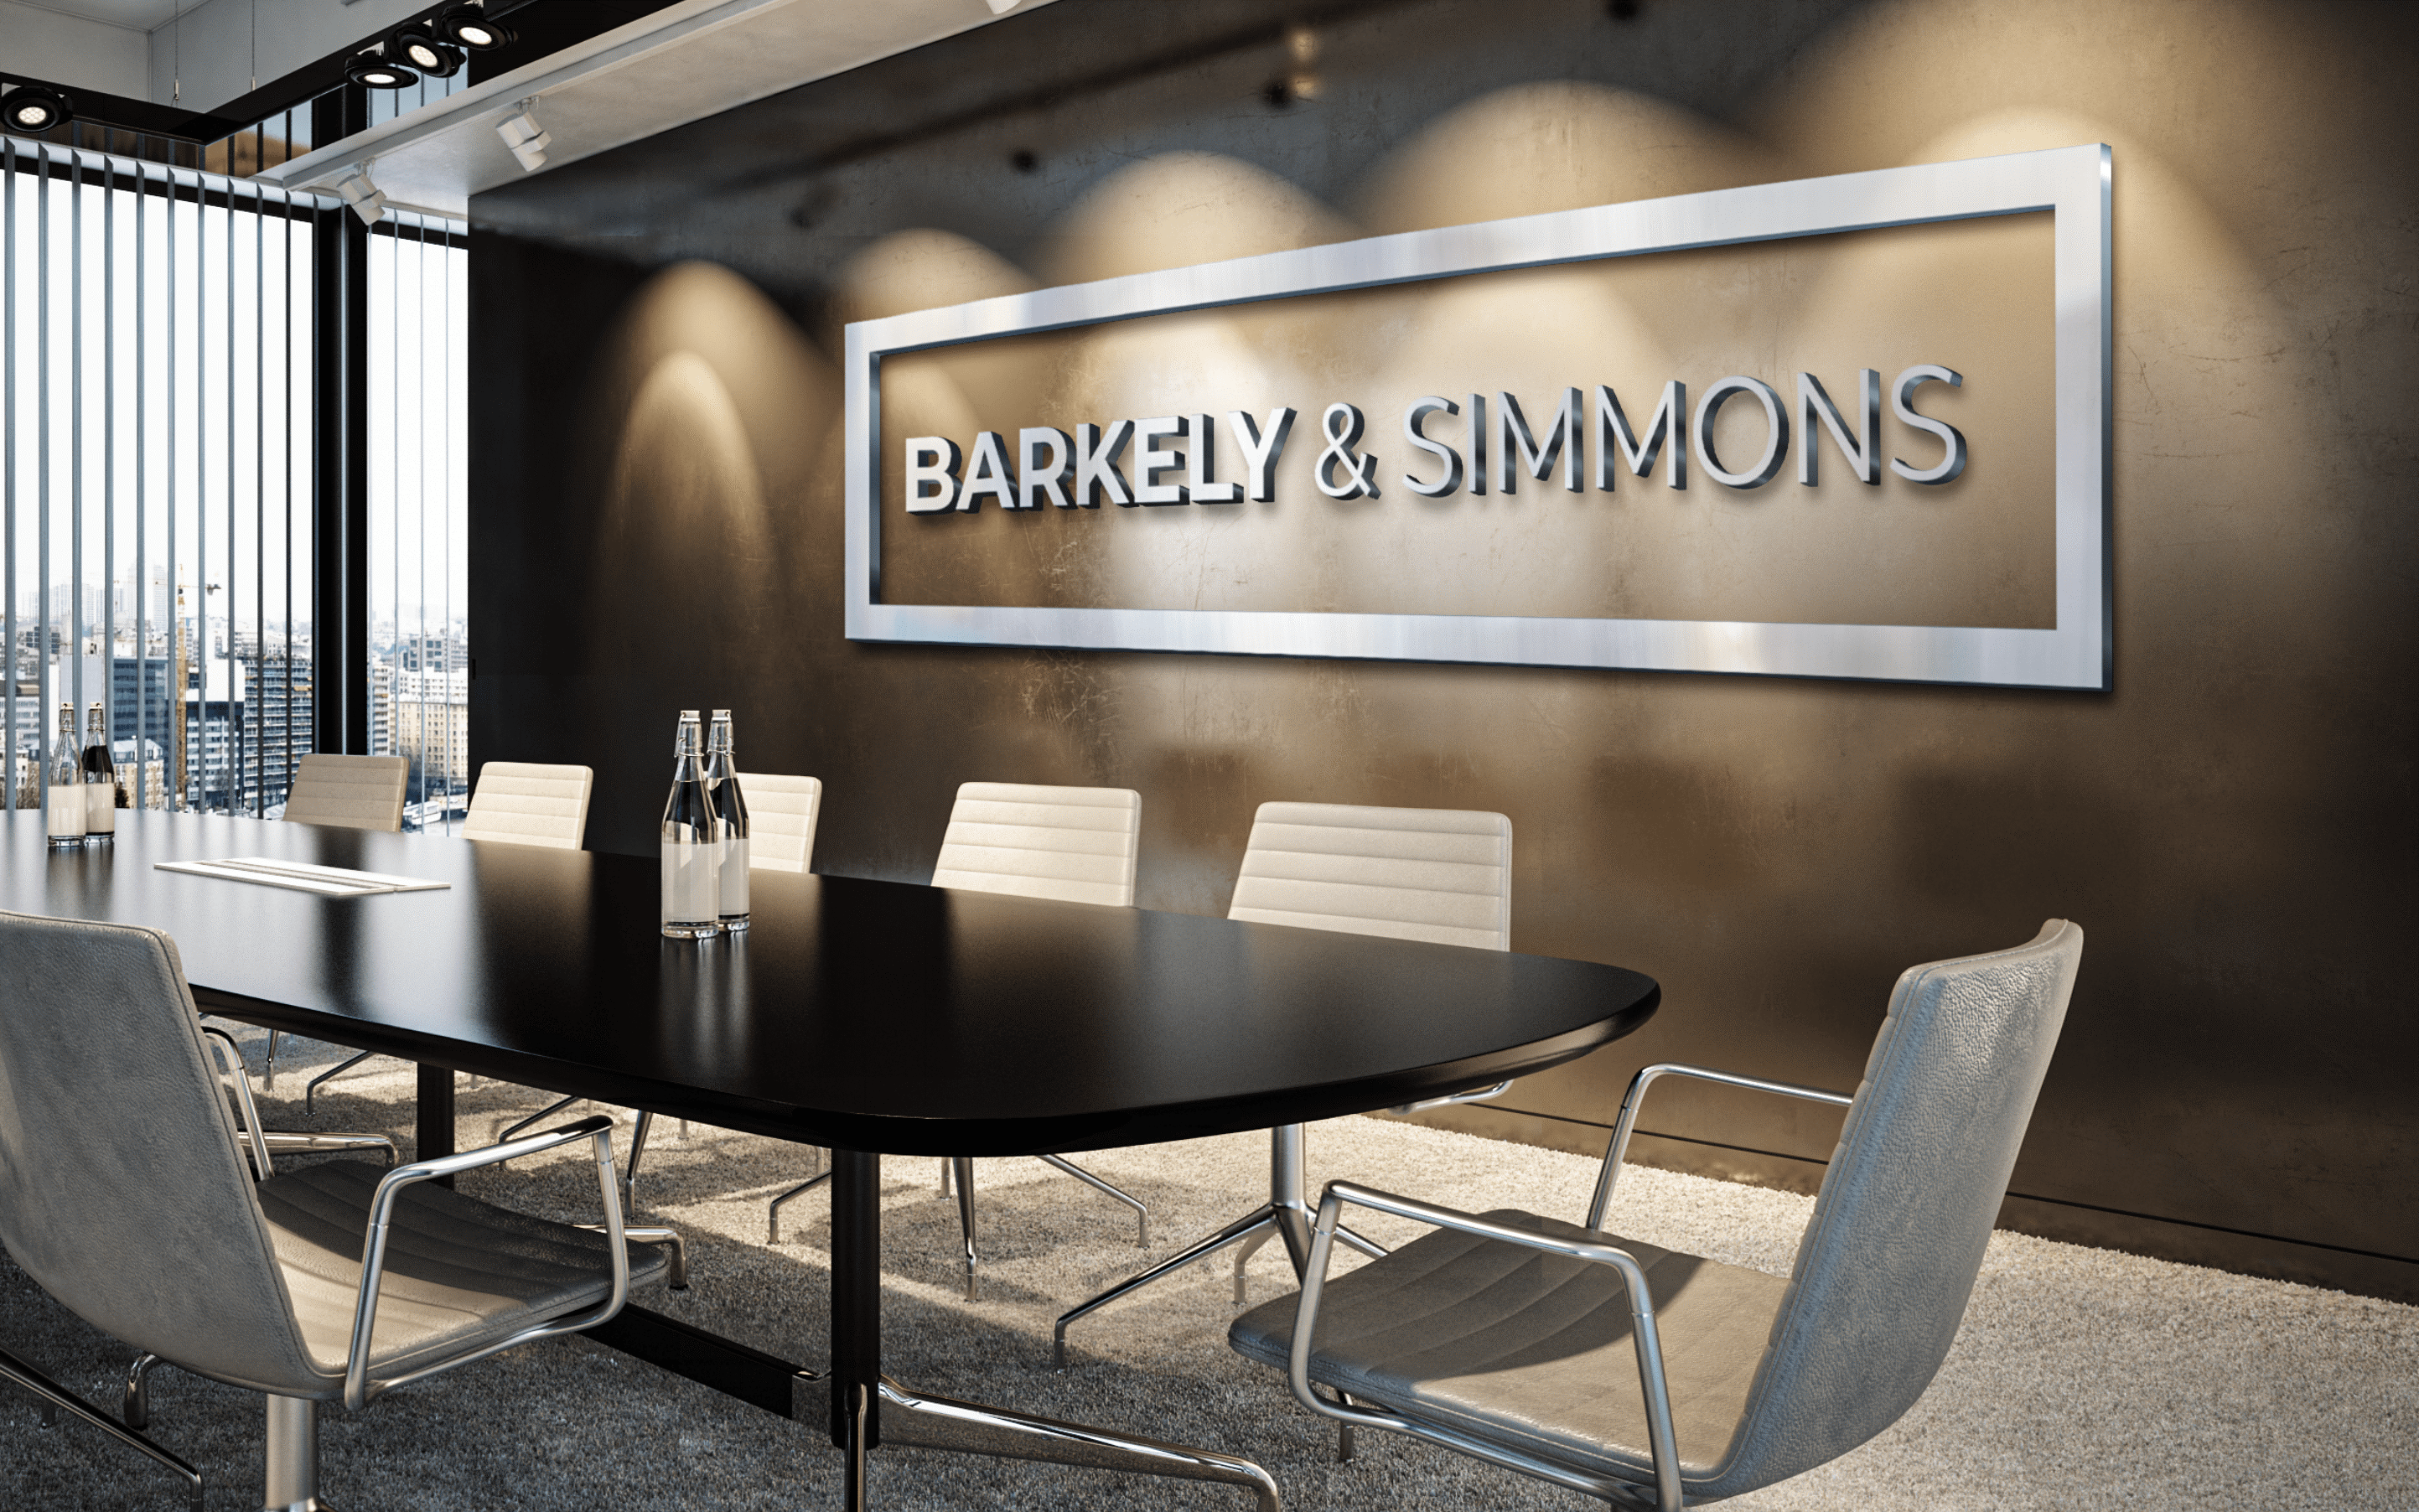 Barkely & Simmons sign